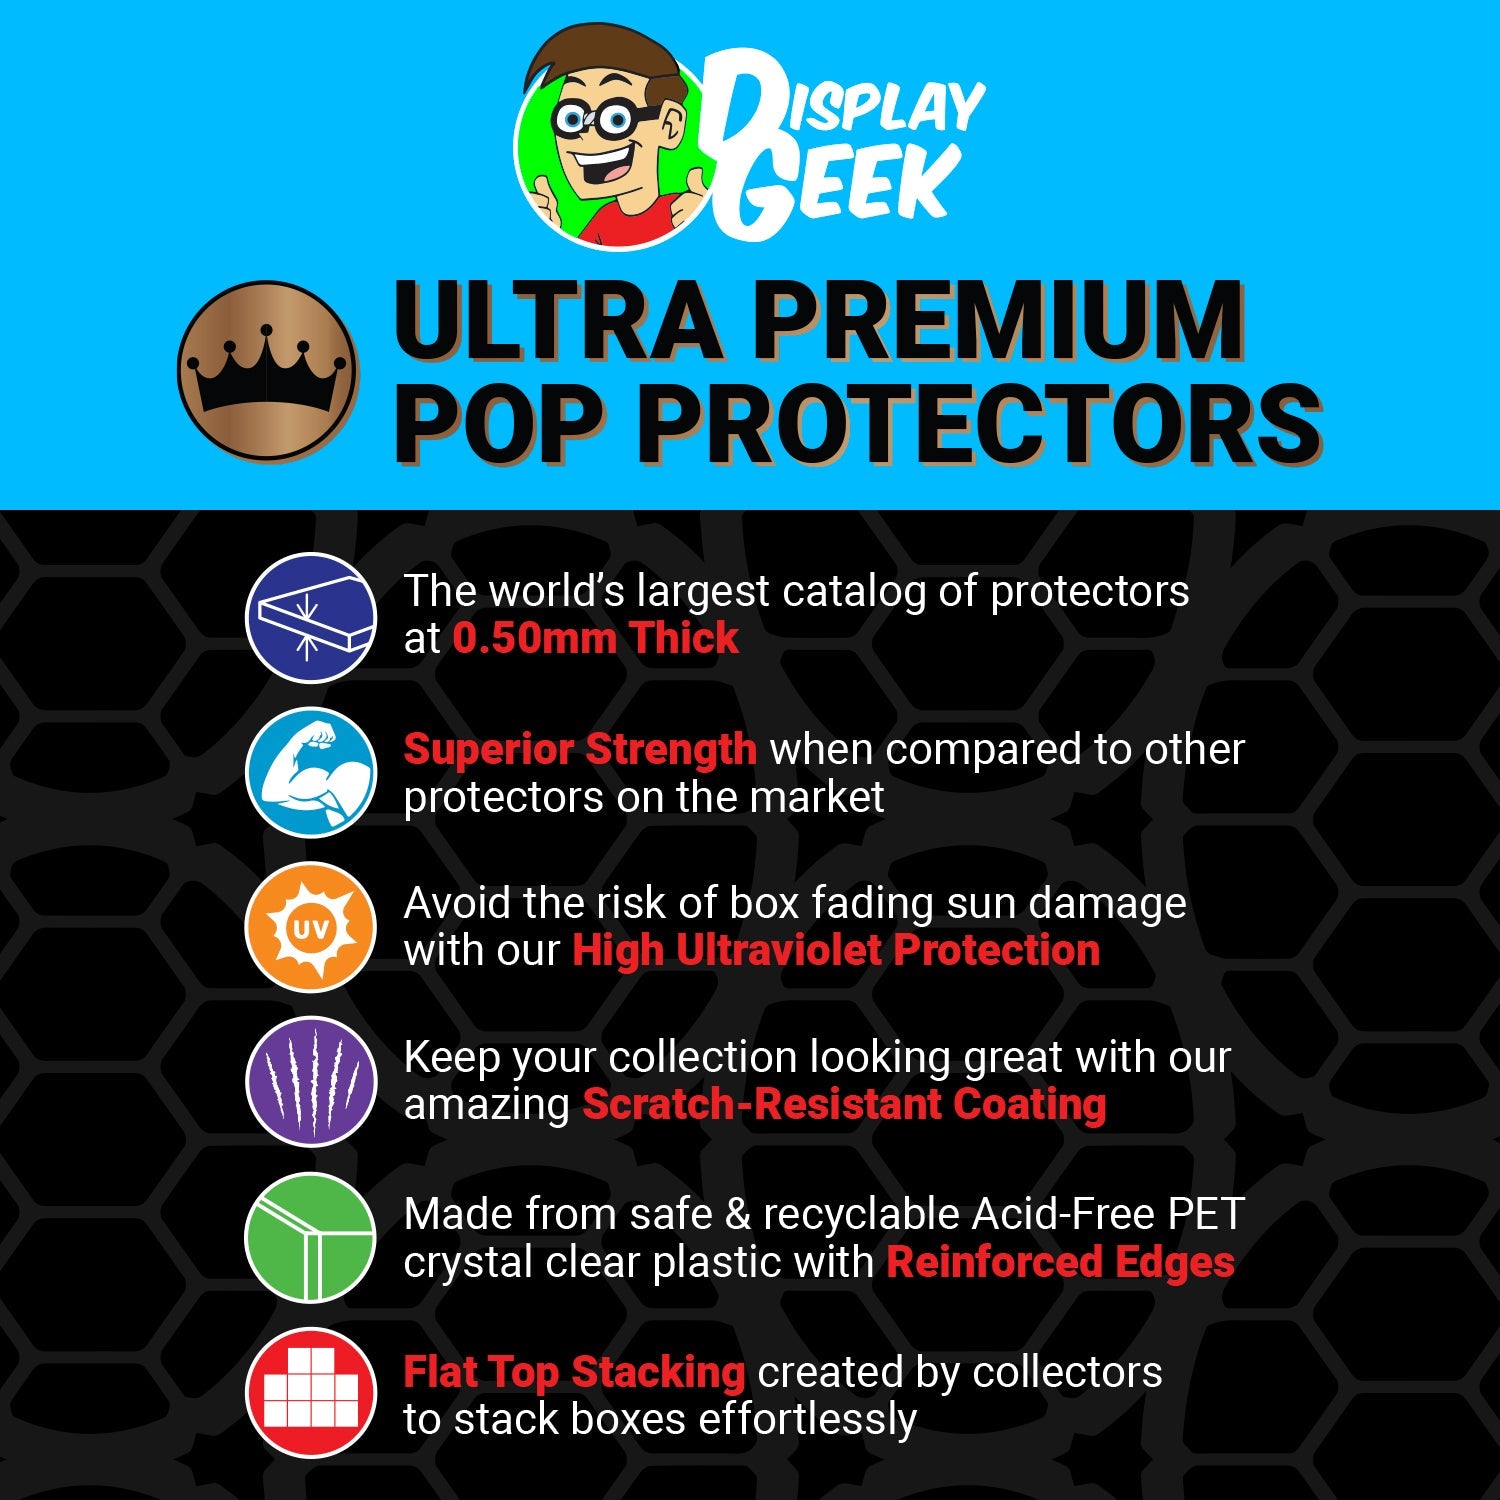 Pop Protector for Blockbuster Rewind Funko Pop - PPG Pop Protector Guide Search Created by Display Geek